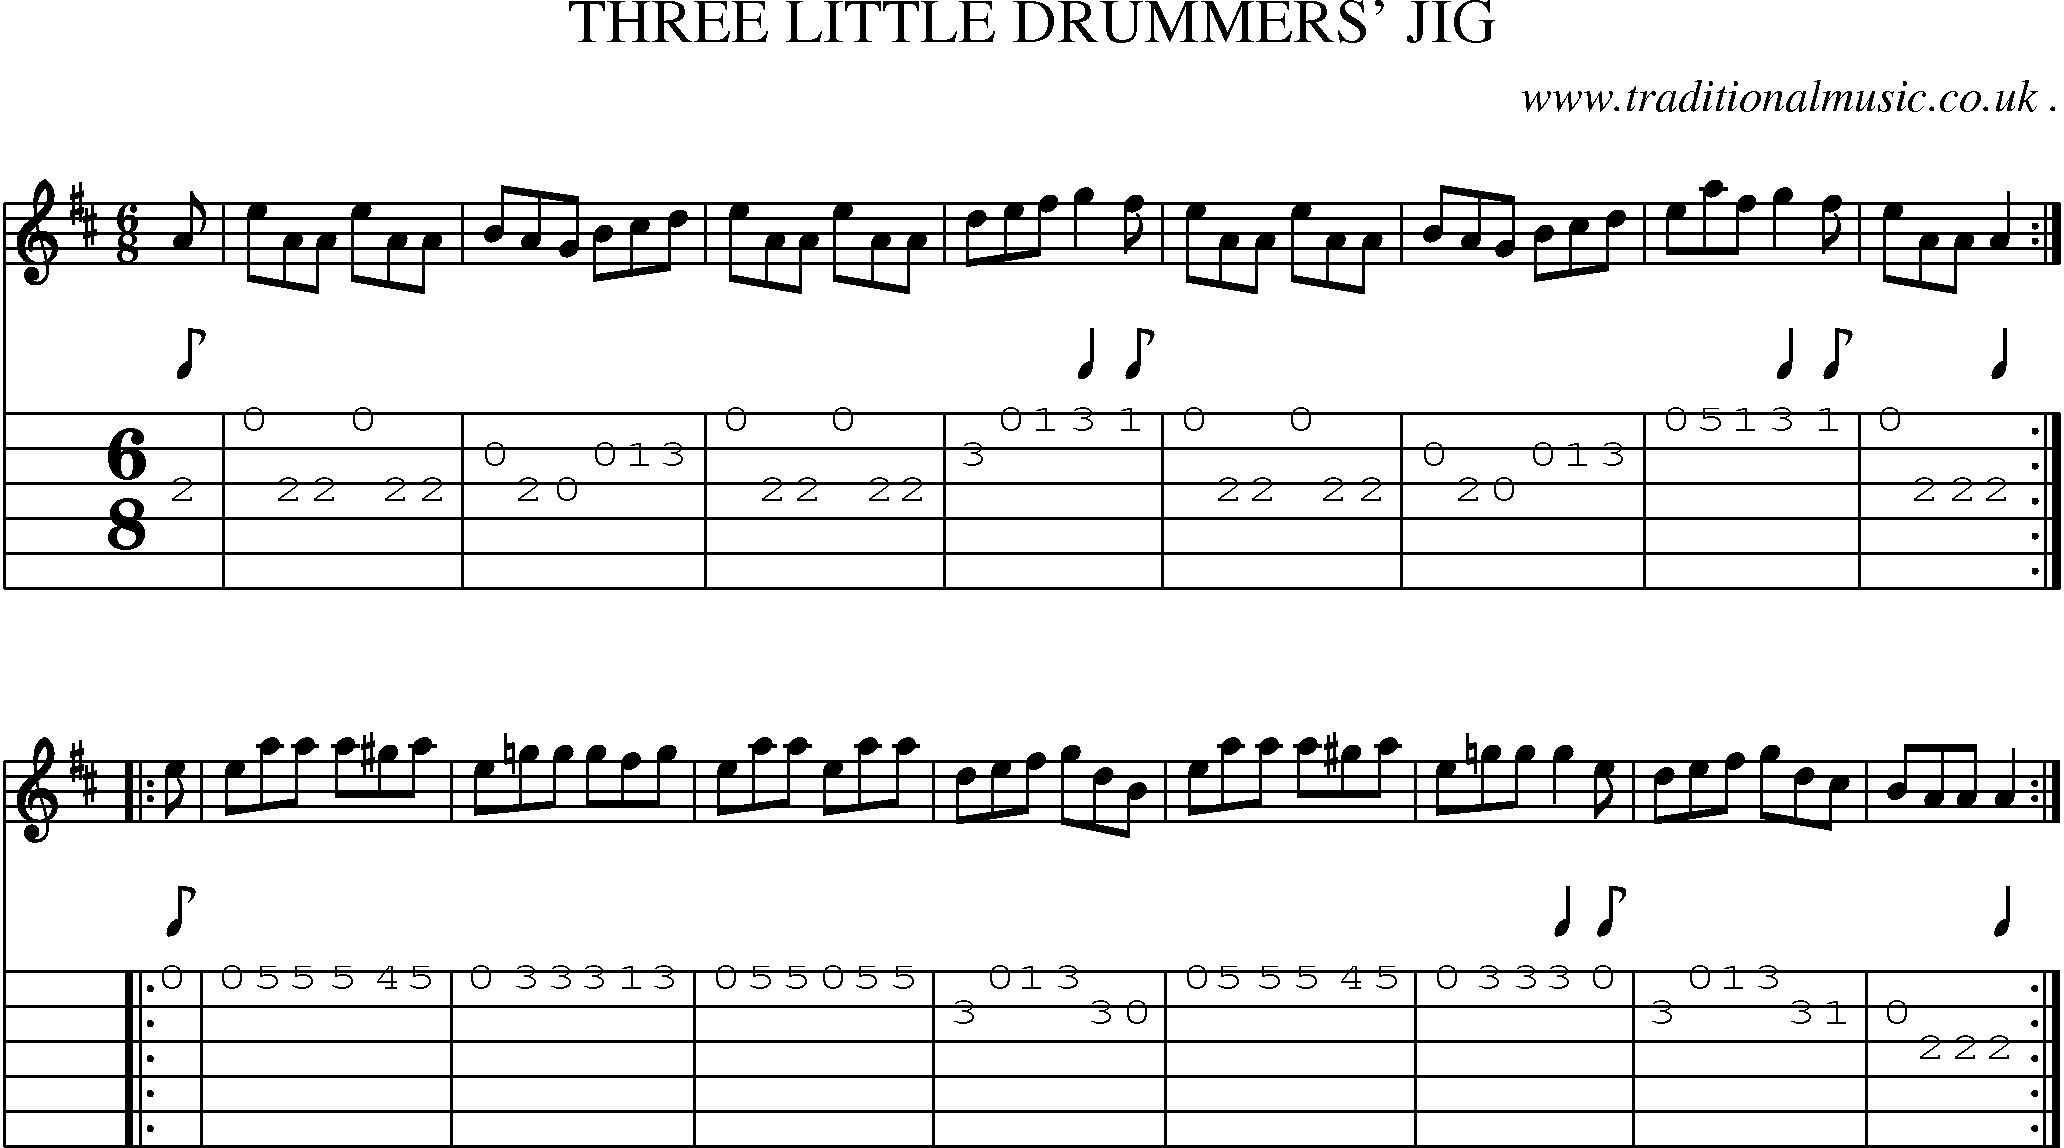 Sheet-Music and Guitar Tabs for Three Little Drummers Jig